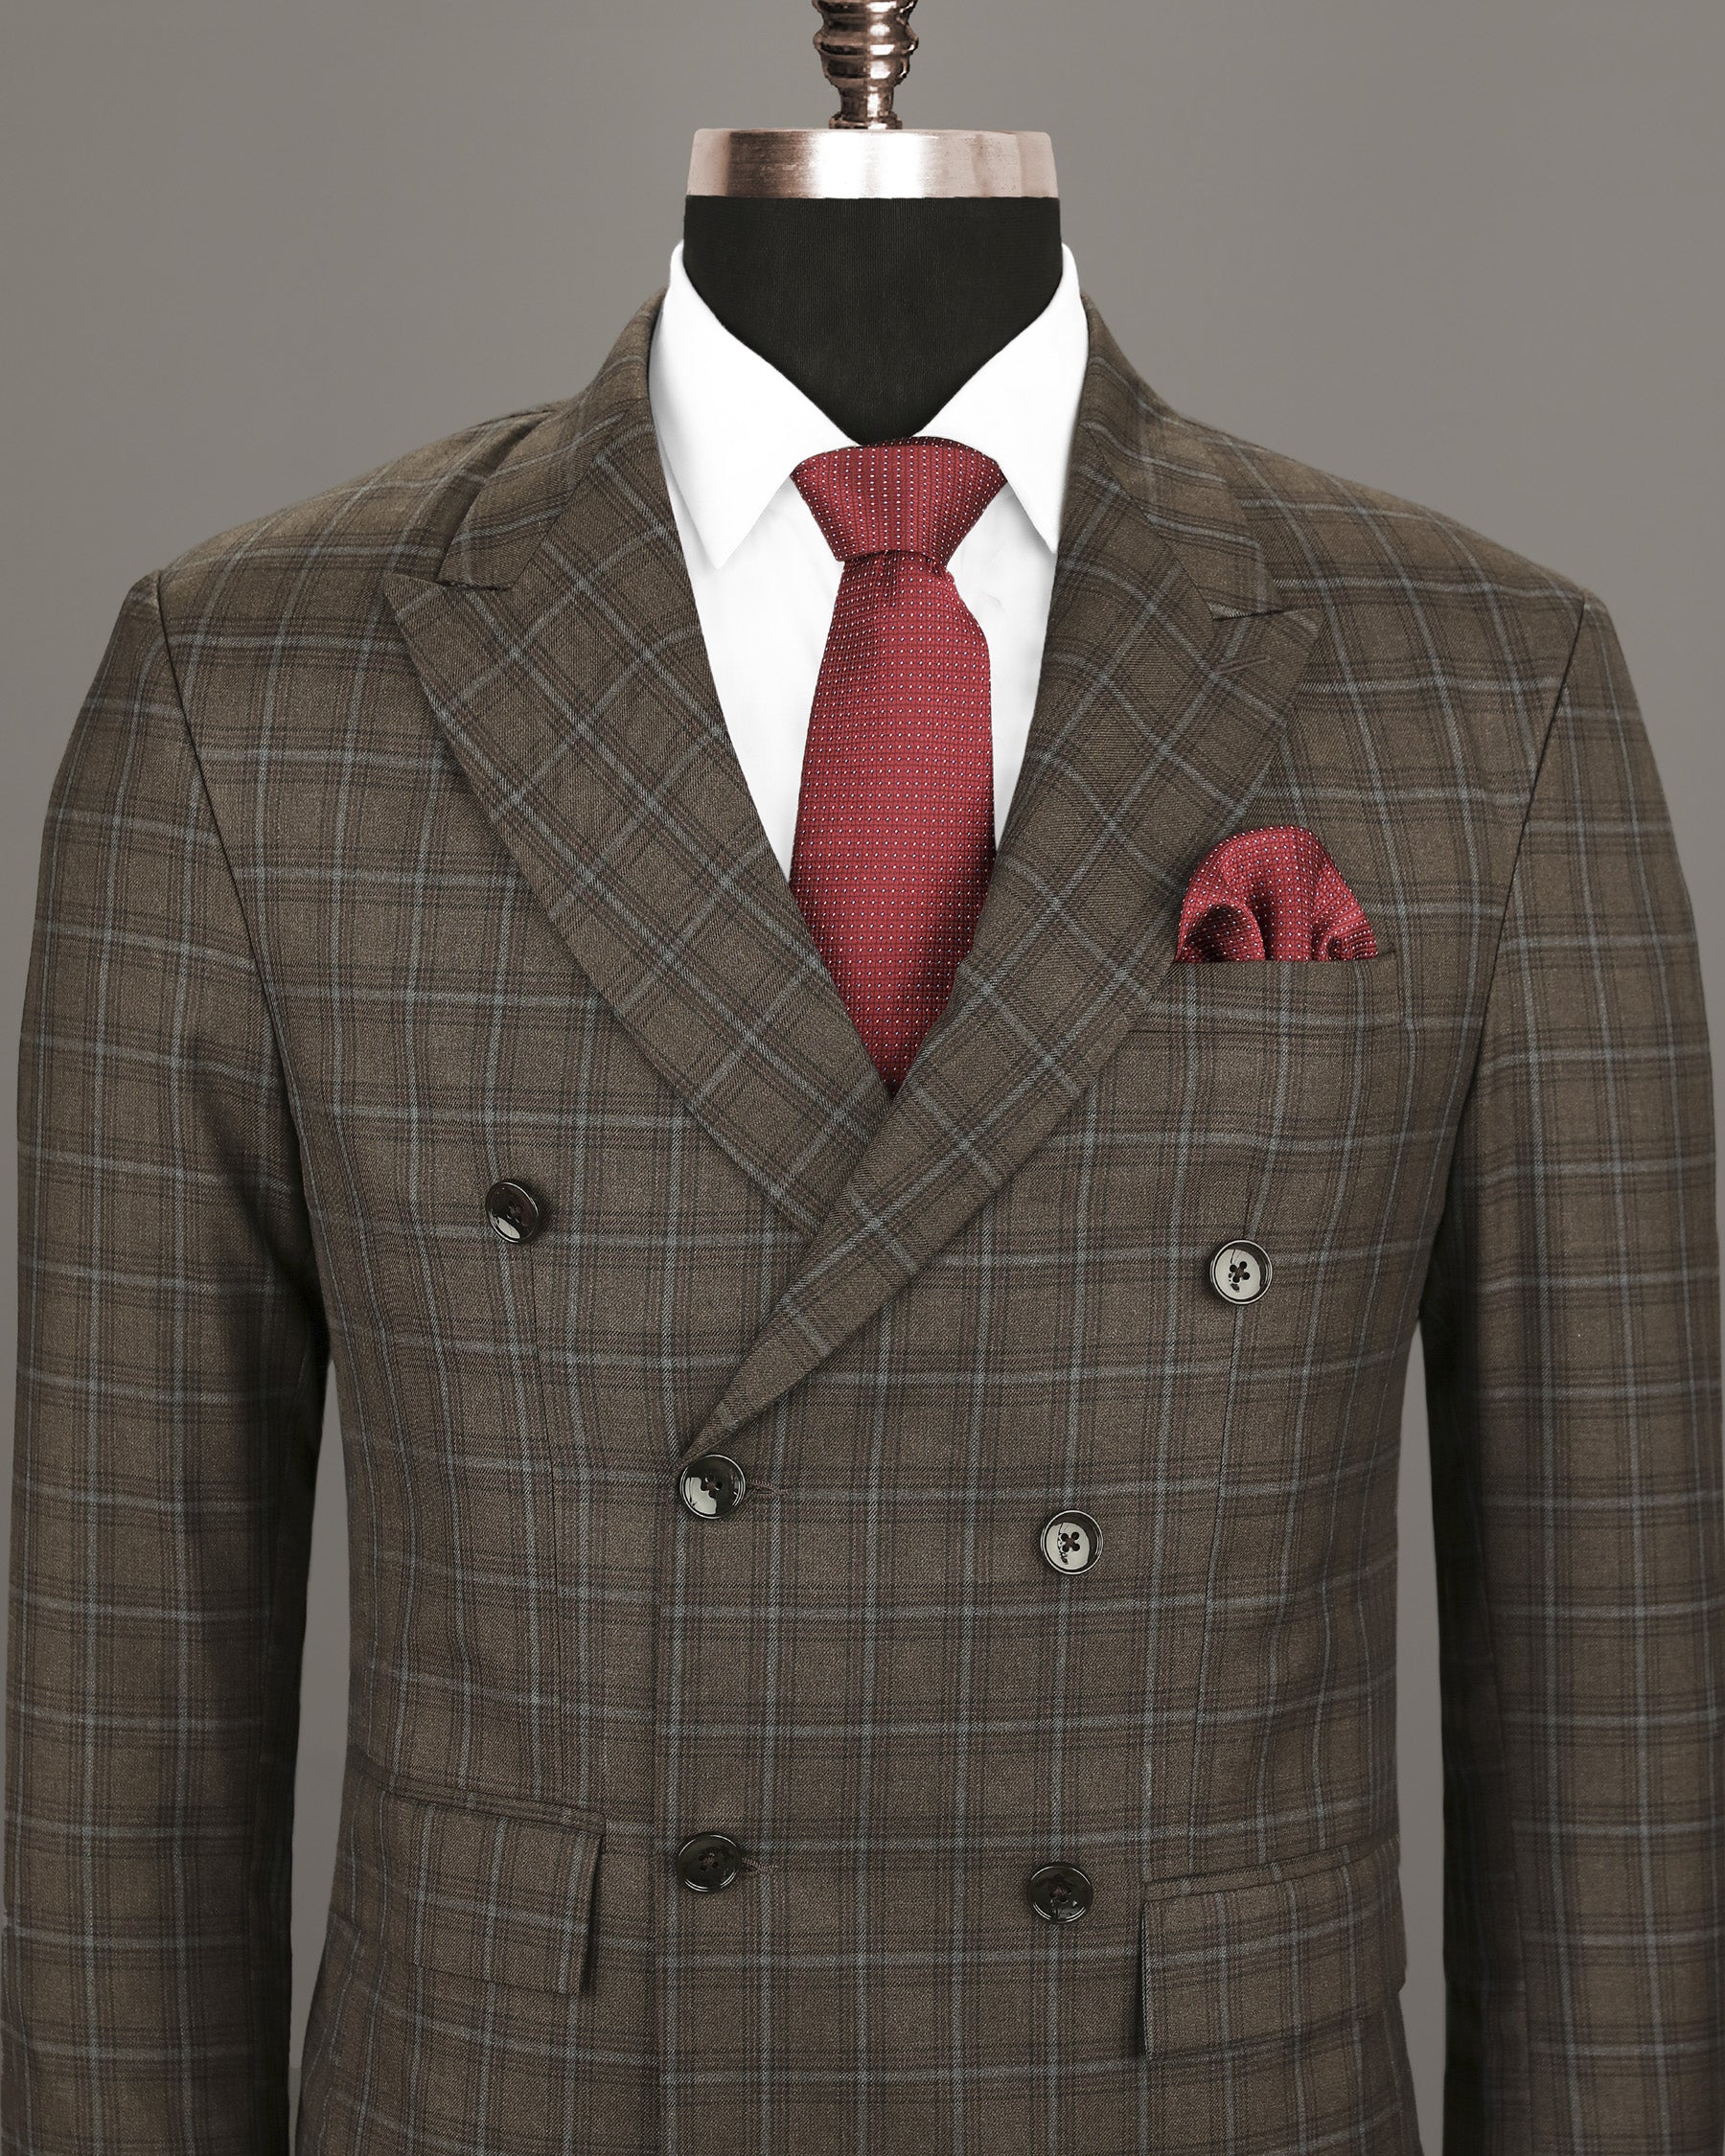 Taupe Brown Windowpane Wool Rich Double Breasted Blazer BL1202-DB-36, BL1202-DB-38, BL1202-DB-46, BL1202-DB-52, BL1202-DB-56, BL1202-DB-58, BL1202-DB-60, BL1202-DB-40, BL1202-DB-42, BL1202-DB-44, BL1202-DB-48, BL1202-DB-50, BL1202-DB-54